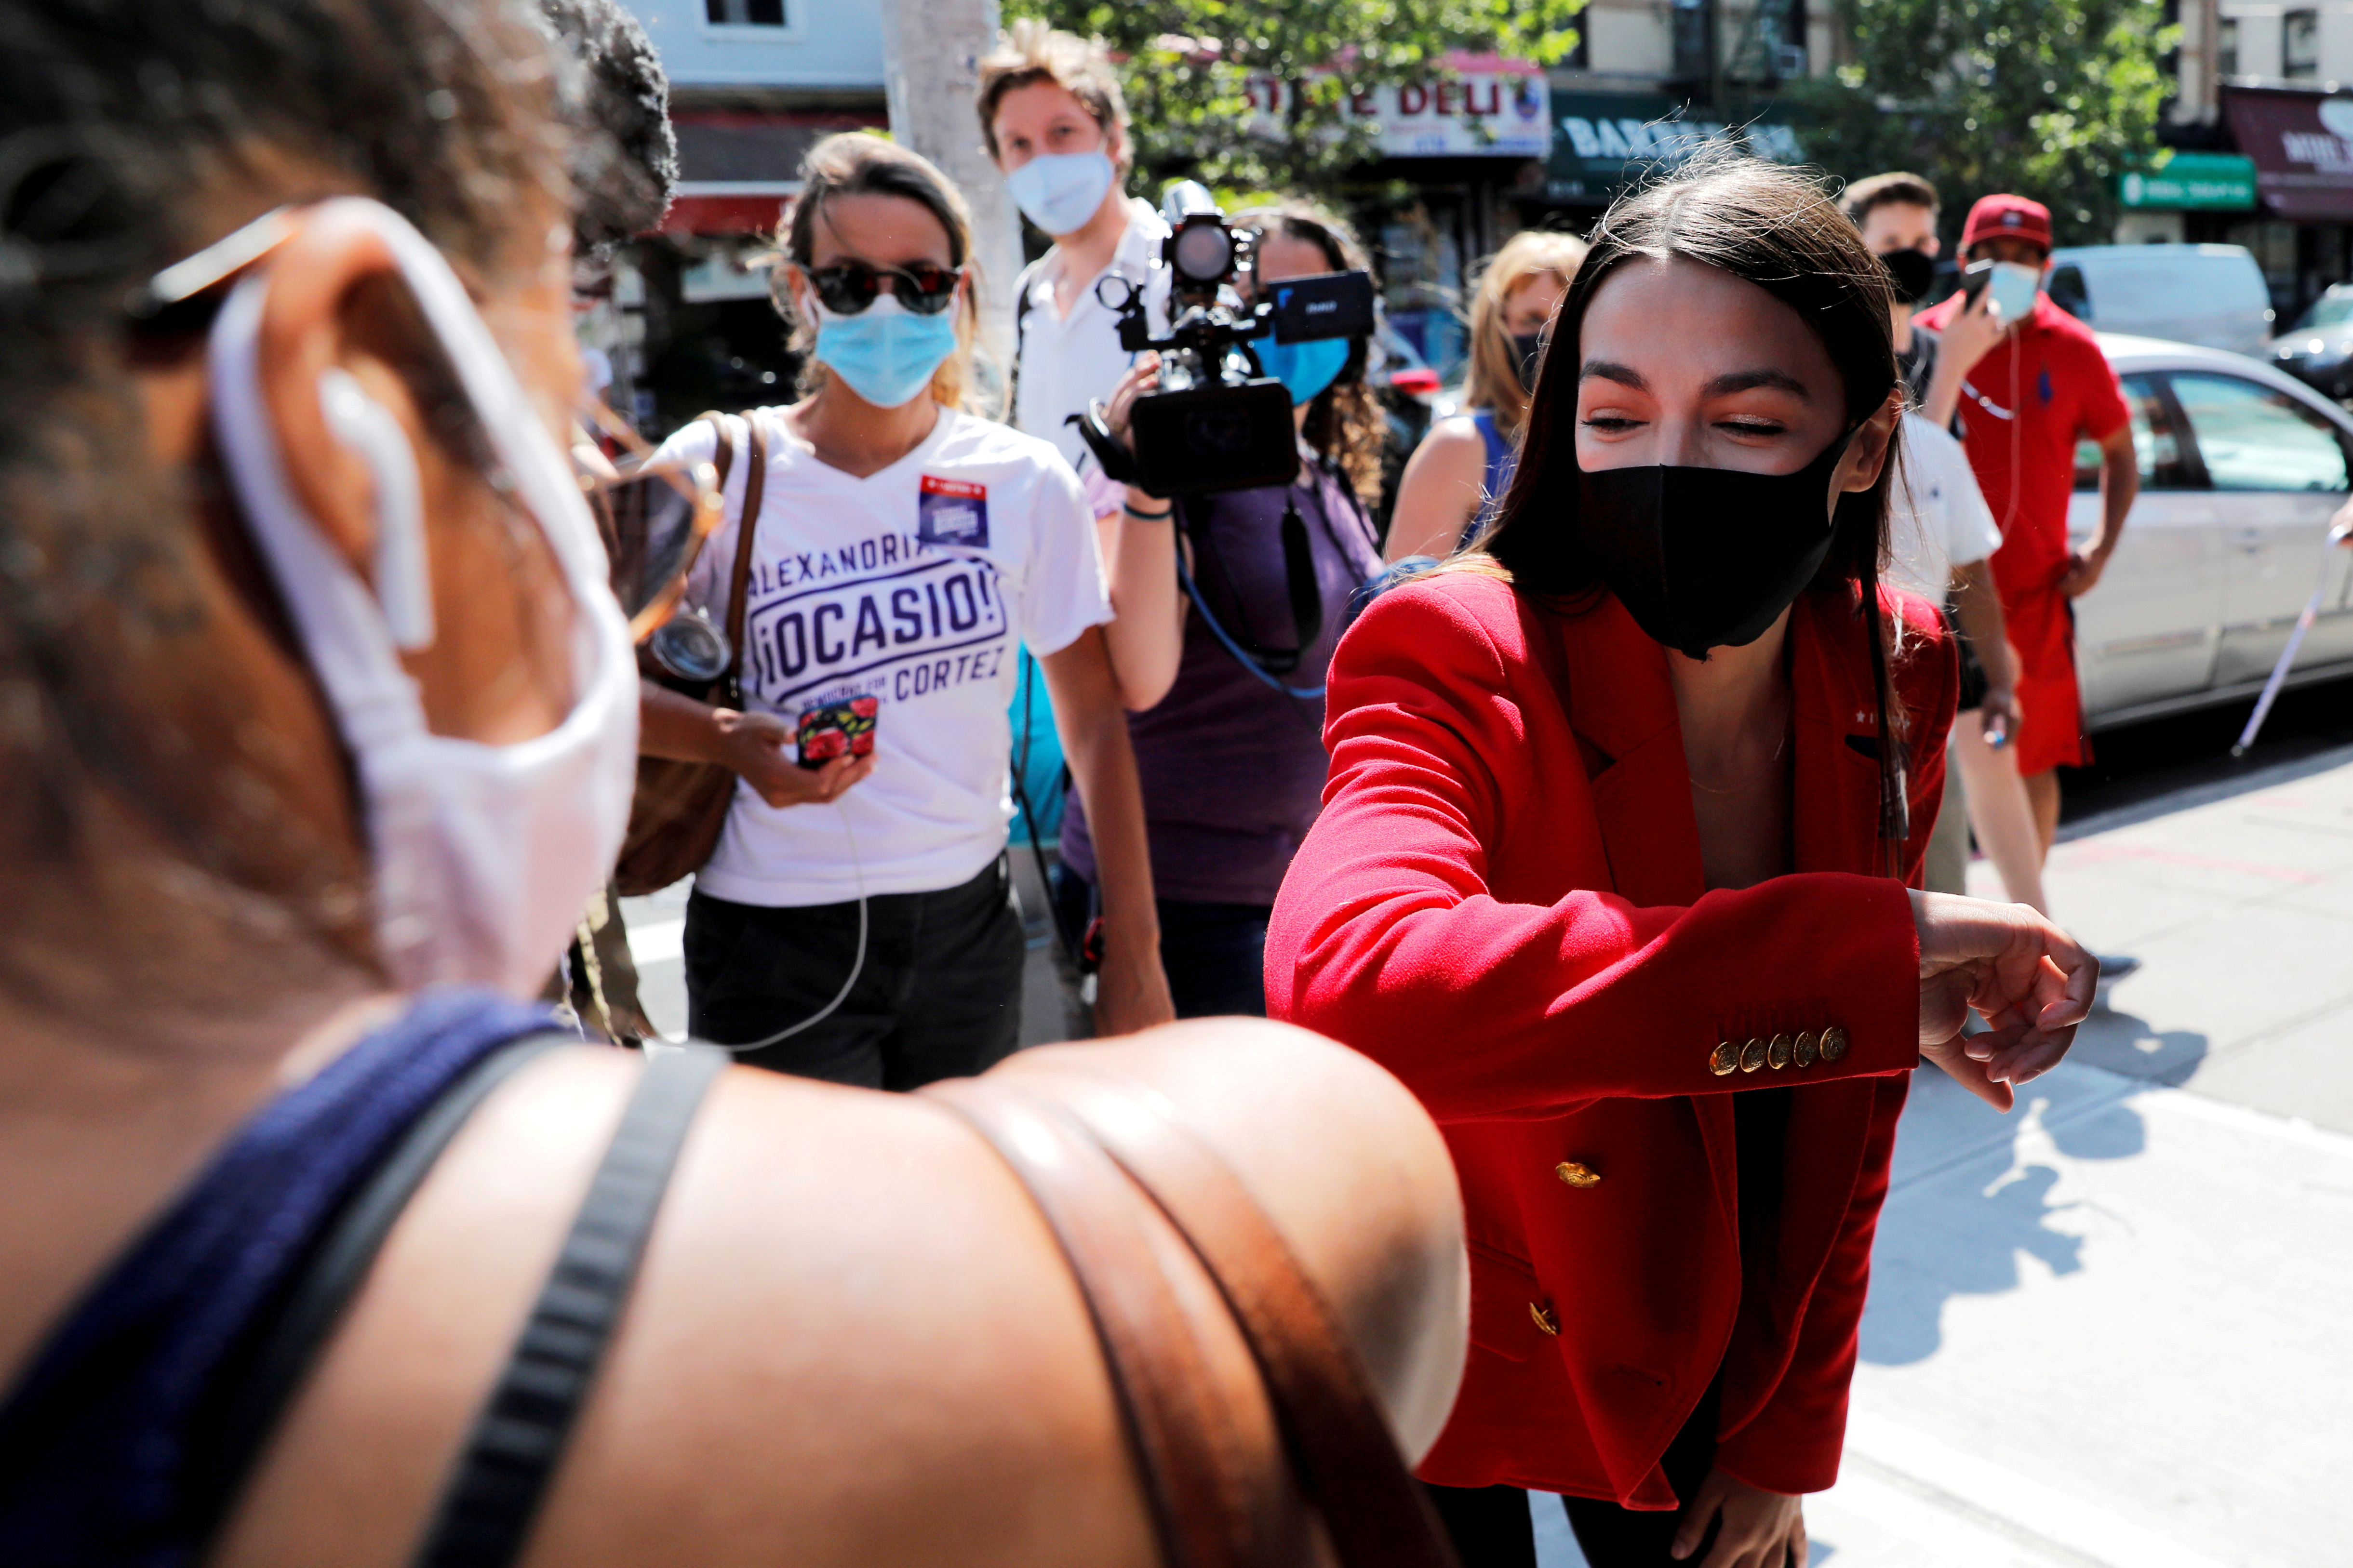 U.S. Rep. Alexandria Ocasio-Cortez (D-NY) bumps elbows with local resident Upkar Chana while greeting voters during the Democratic congressional primary election in the Queens borough of New York City, New York, U.S., June 23, 2020. REUTERS/Mike Segar/File Photo/File Photo